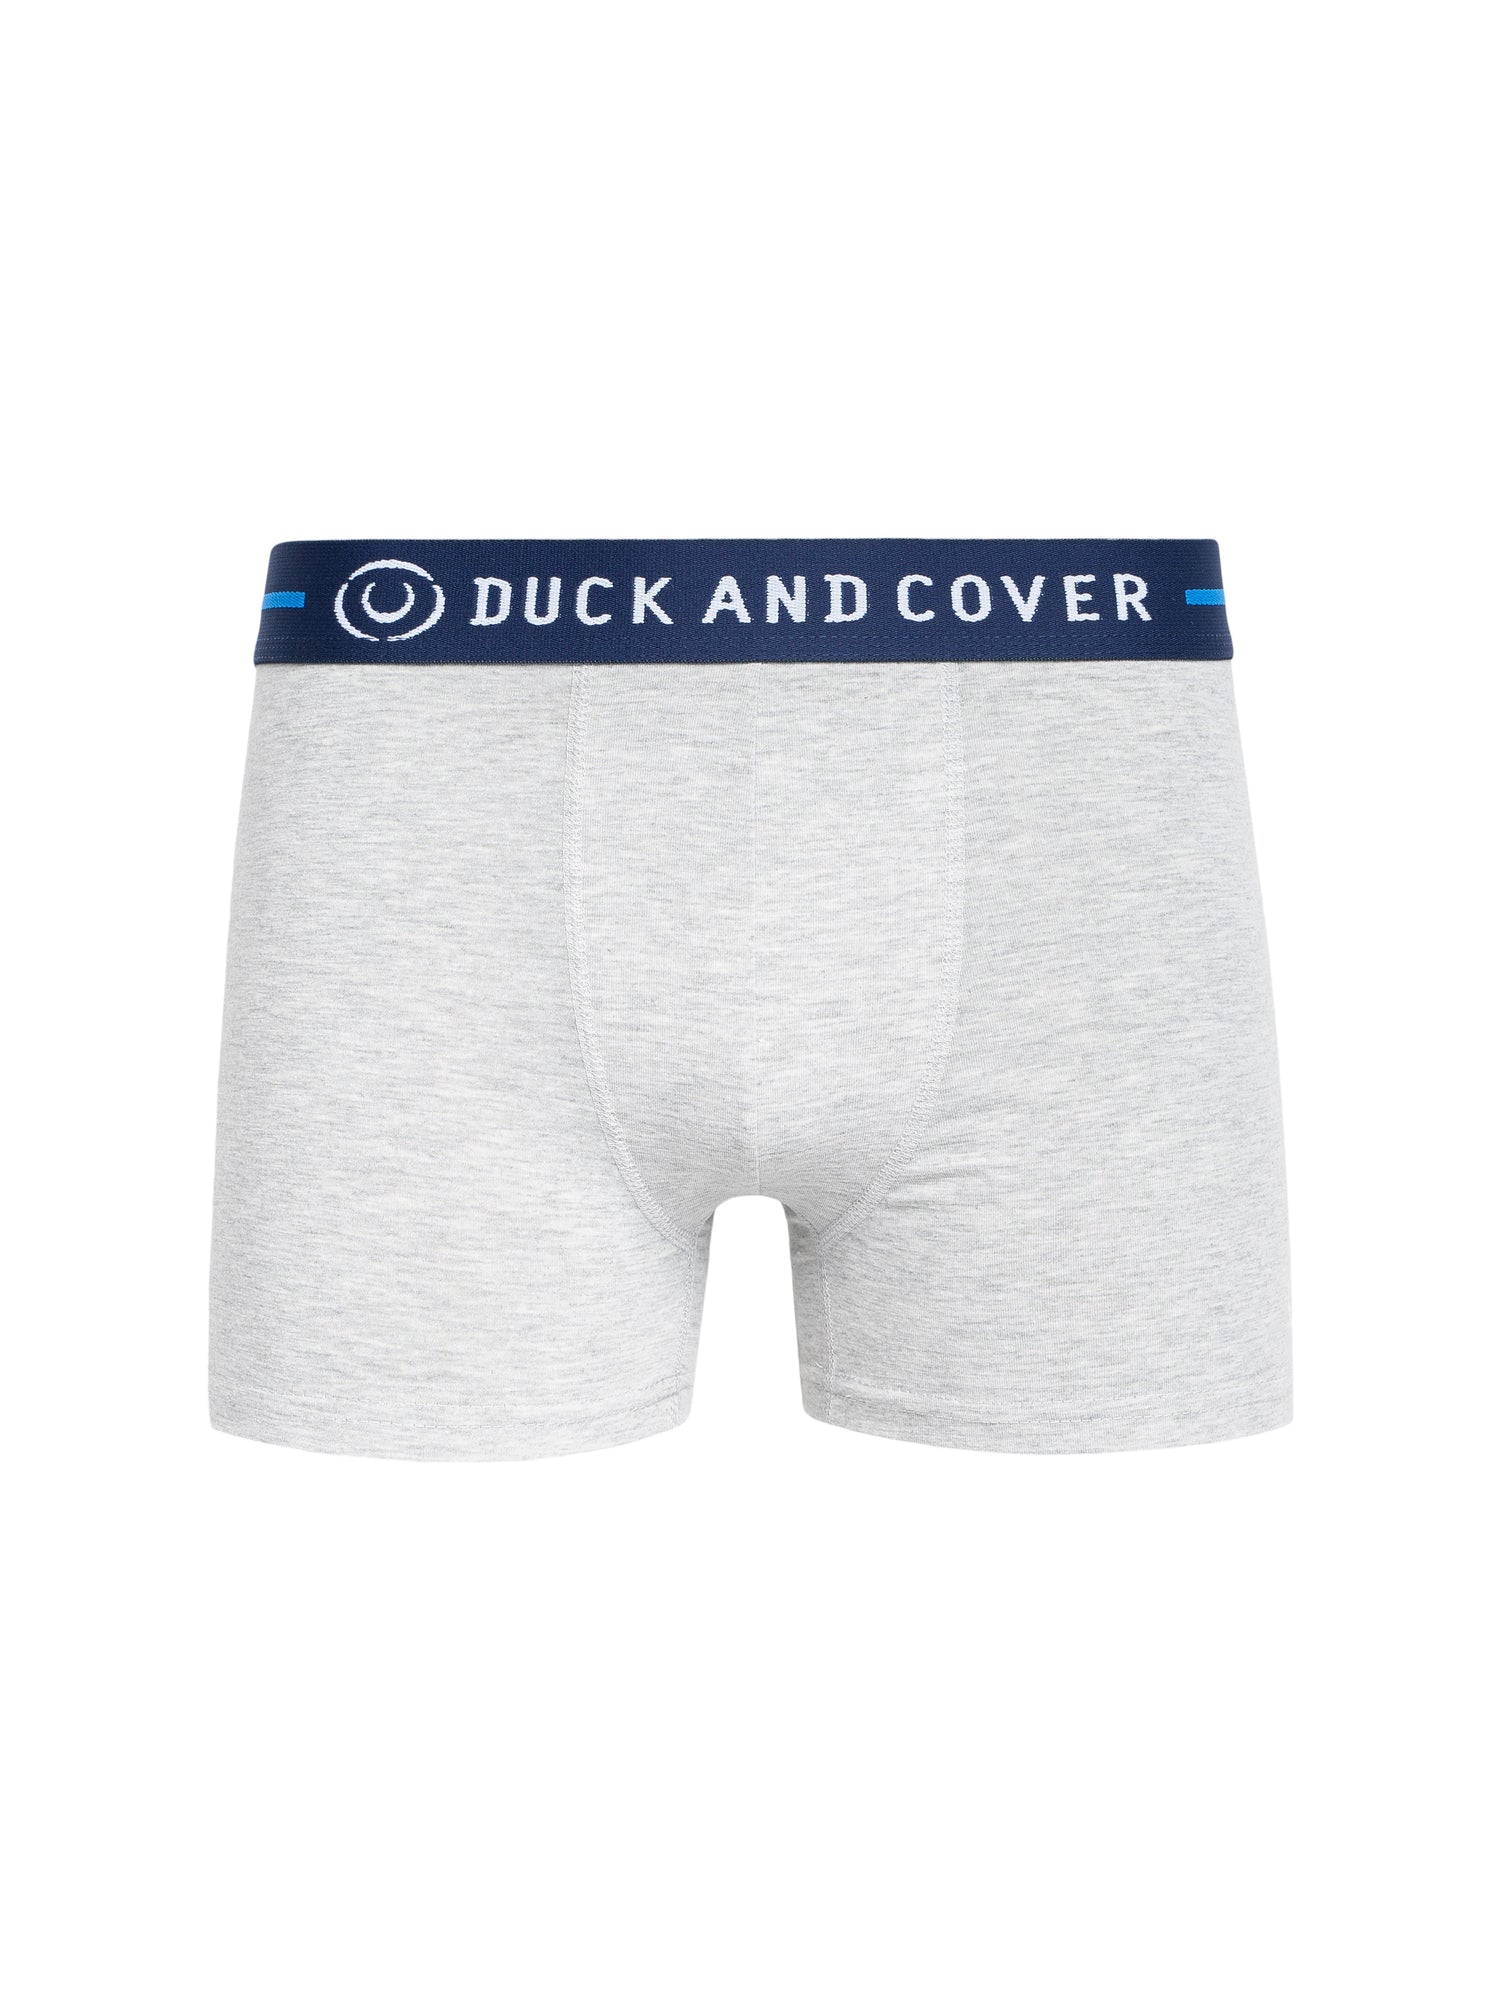 Duck & Cover - Mens Scorla 2 Boxer Shorts 3pk Red – Duck and Cover